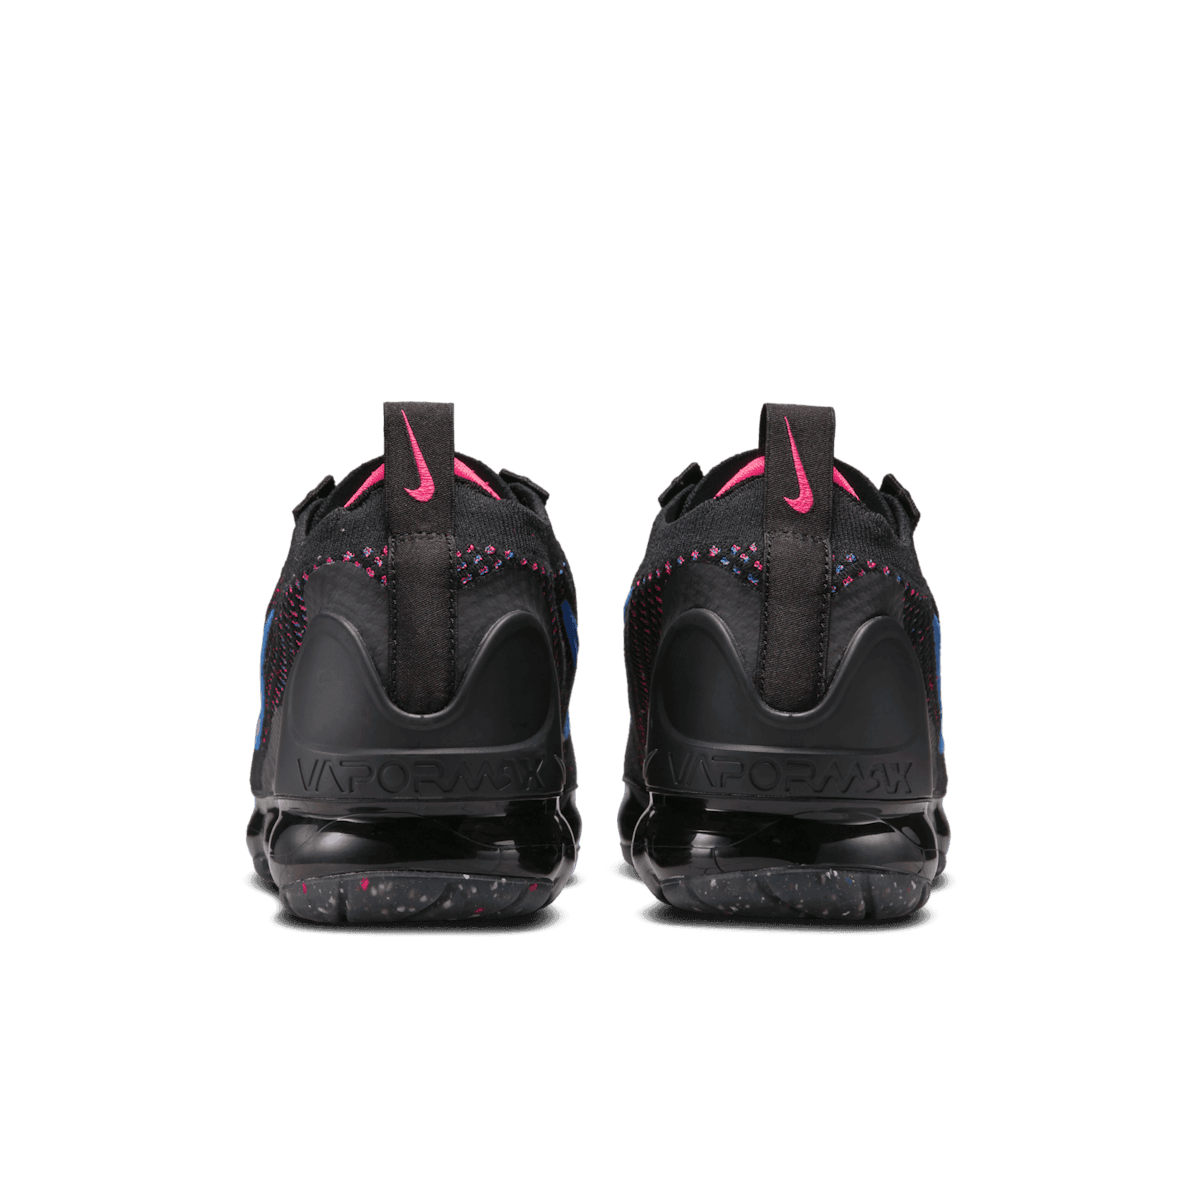 Nike Air VaporMax 2021 Flyknit Shoes in Black Angle 3